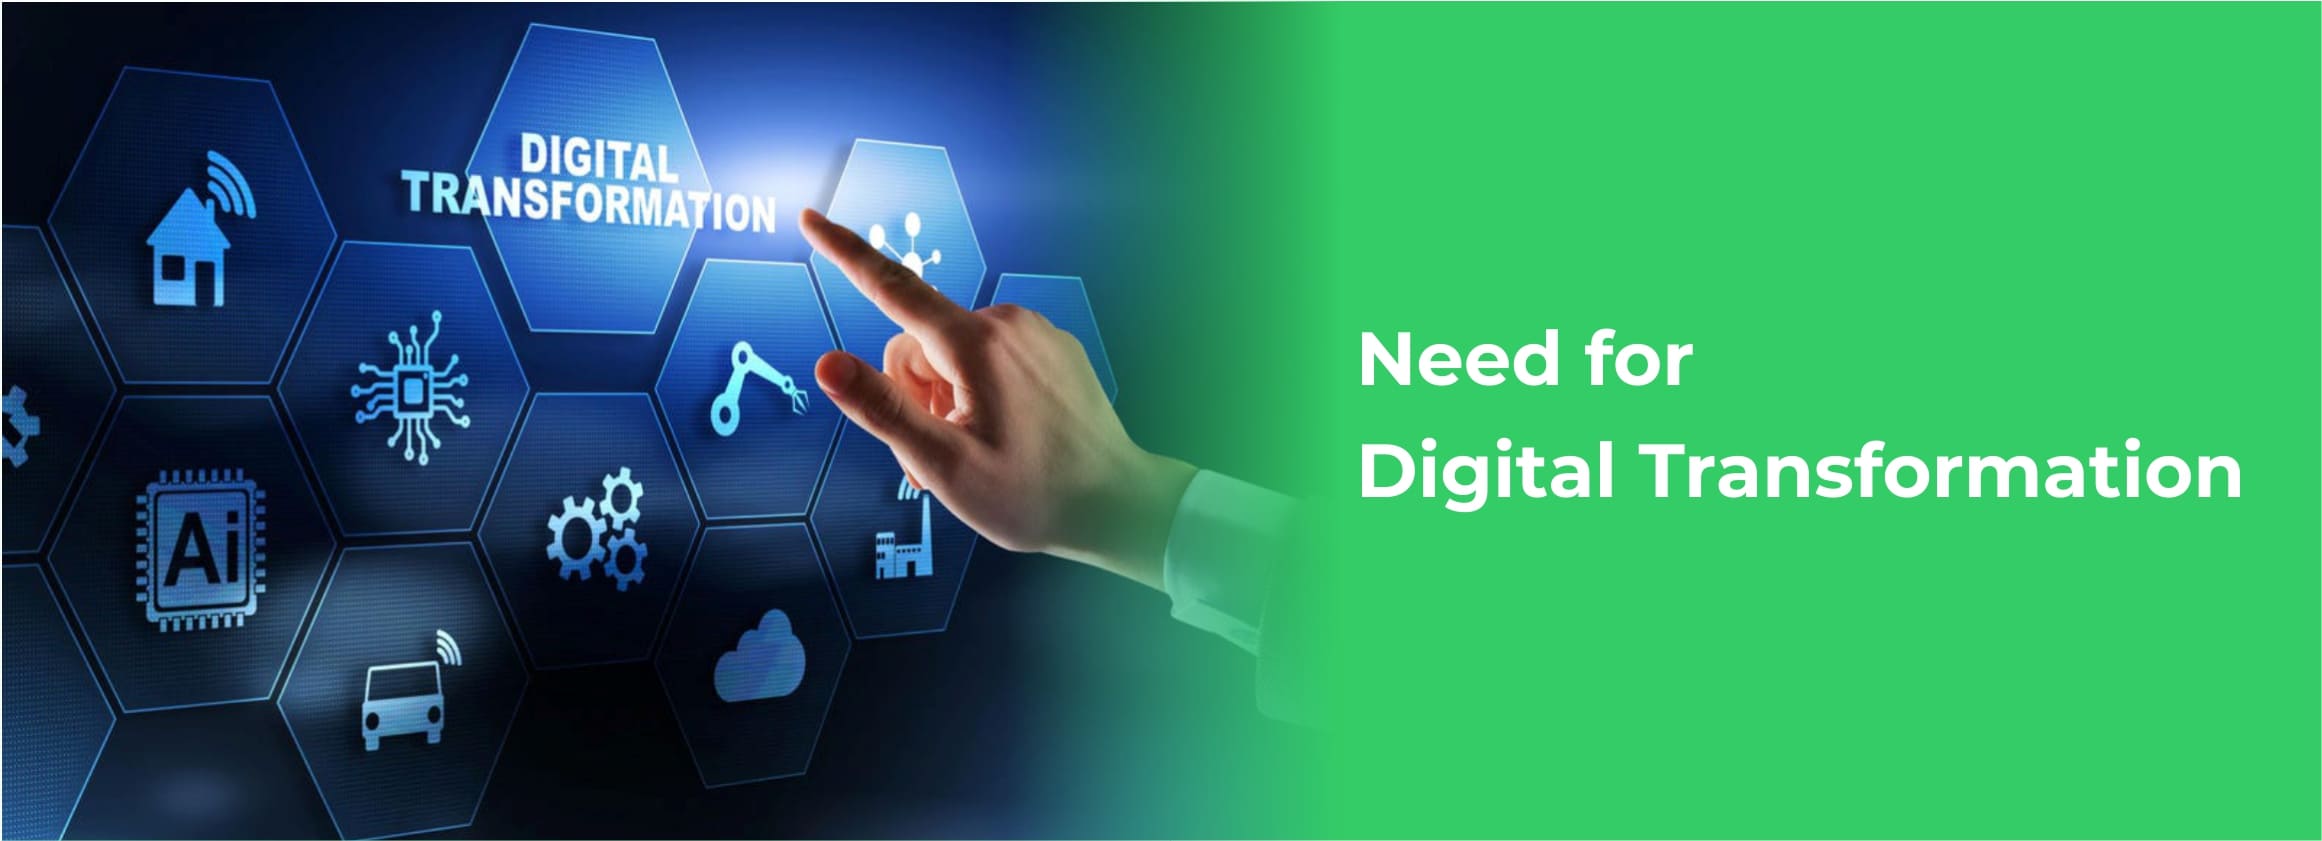 Need for Digital Transformation Manufacturing 